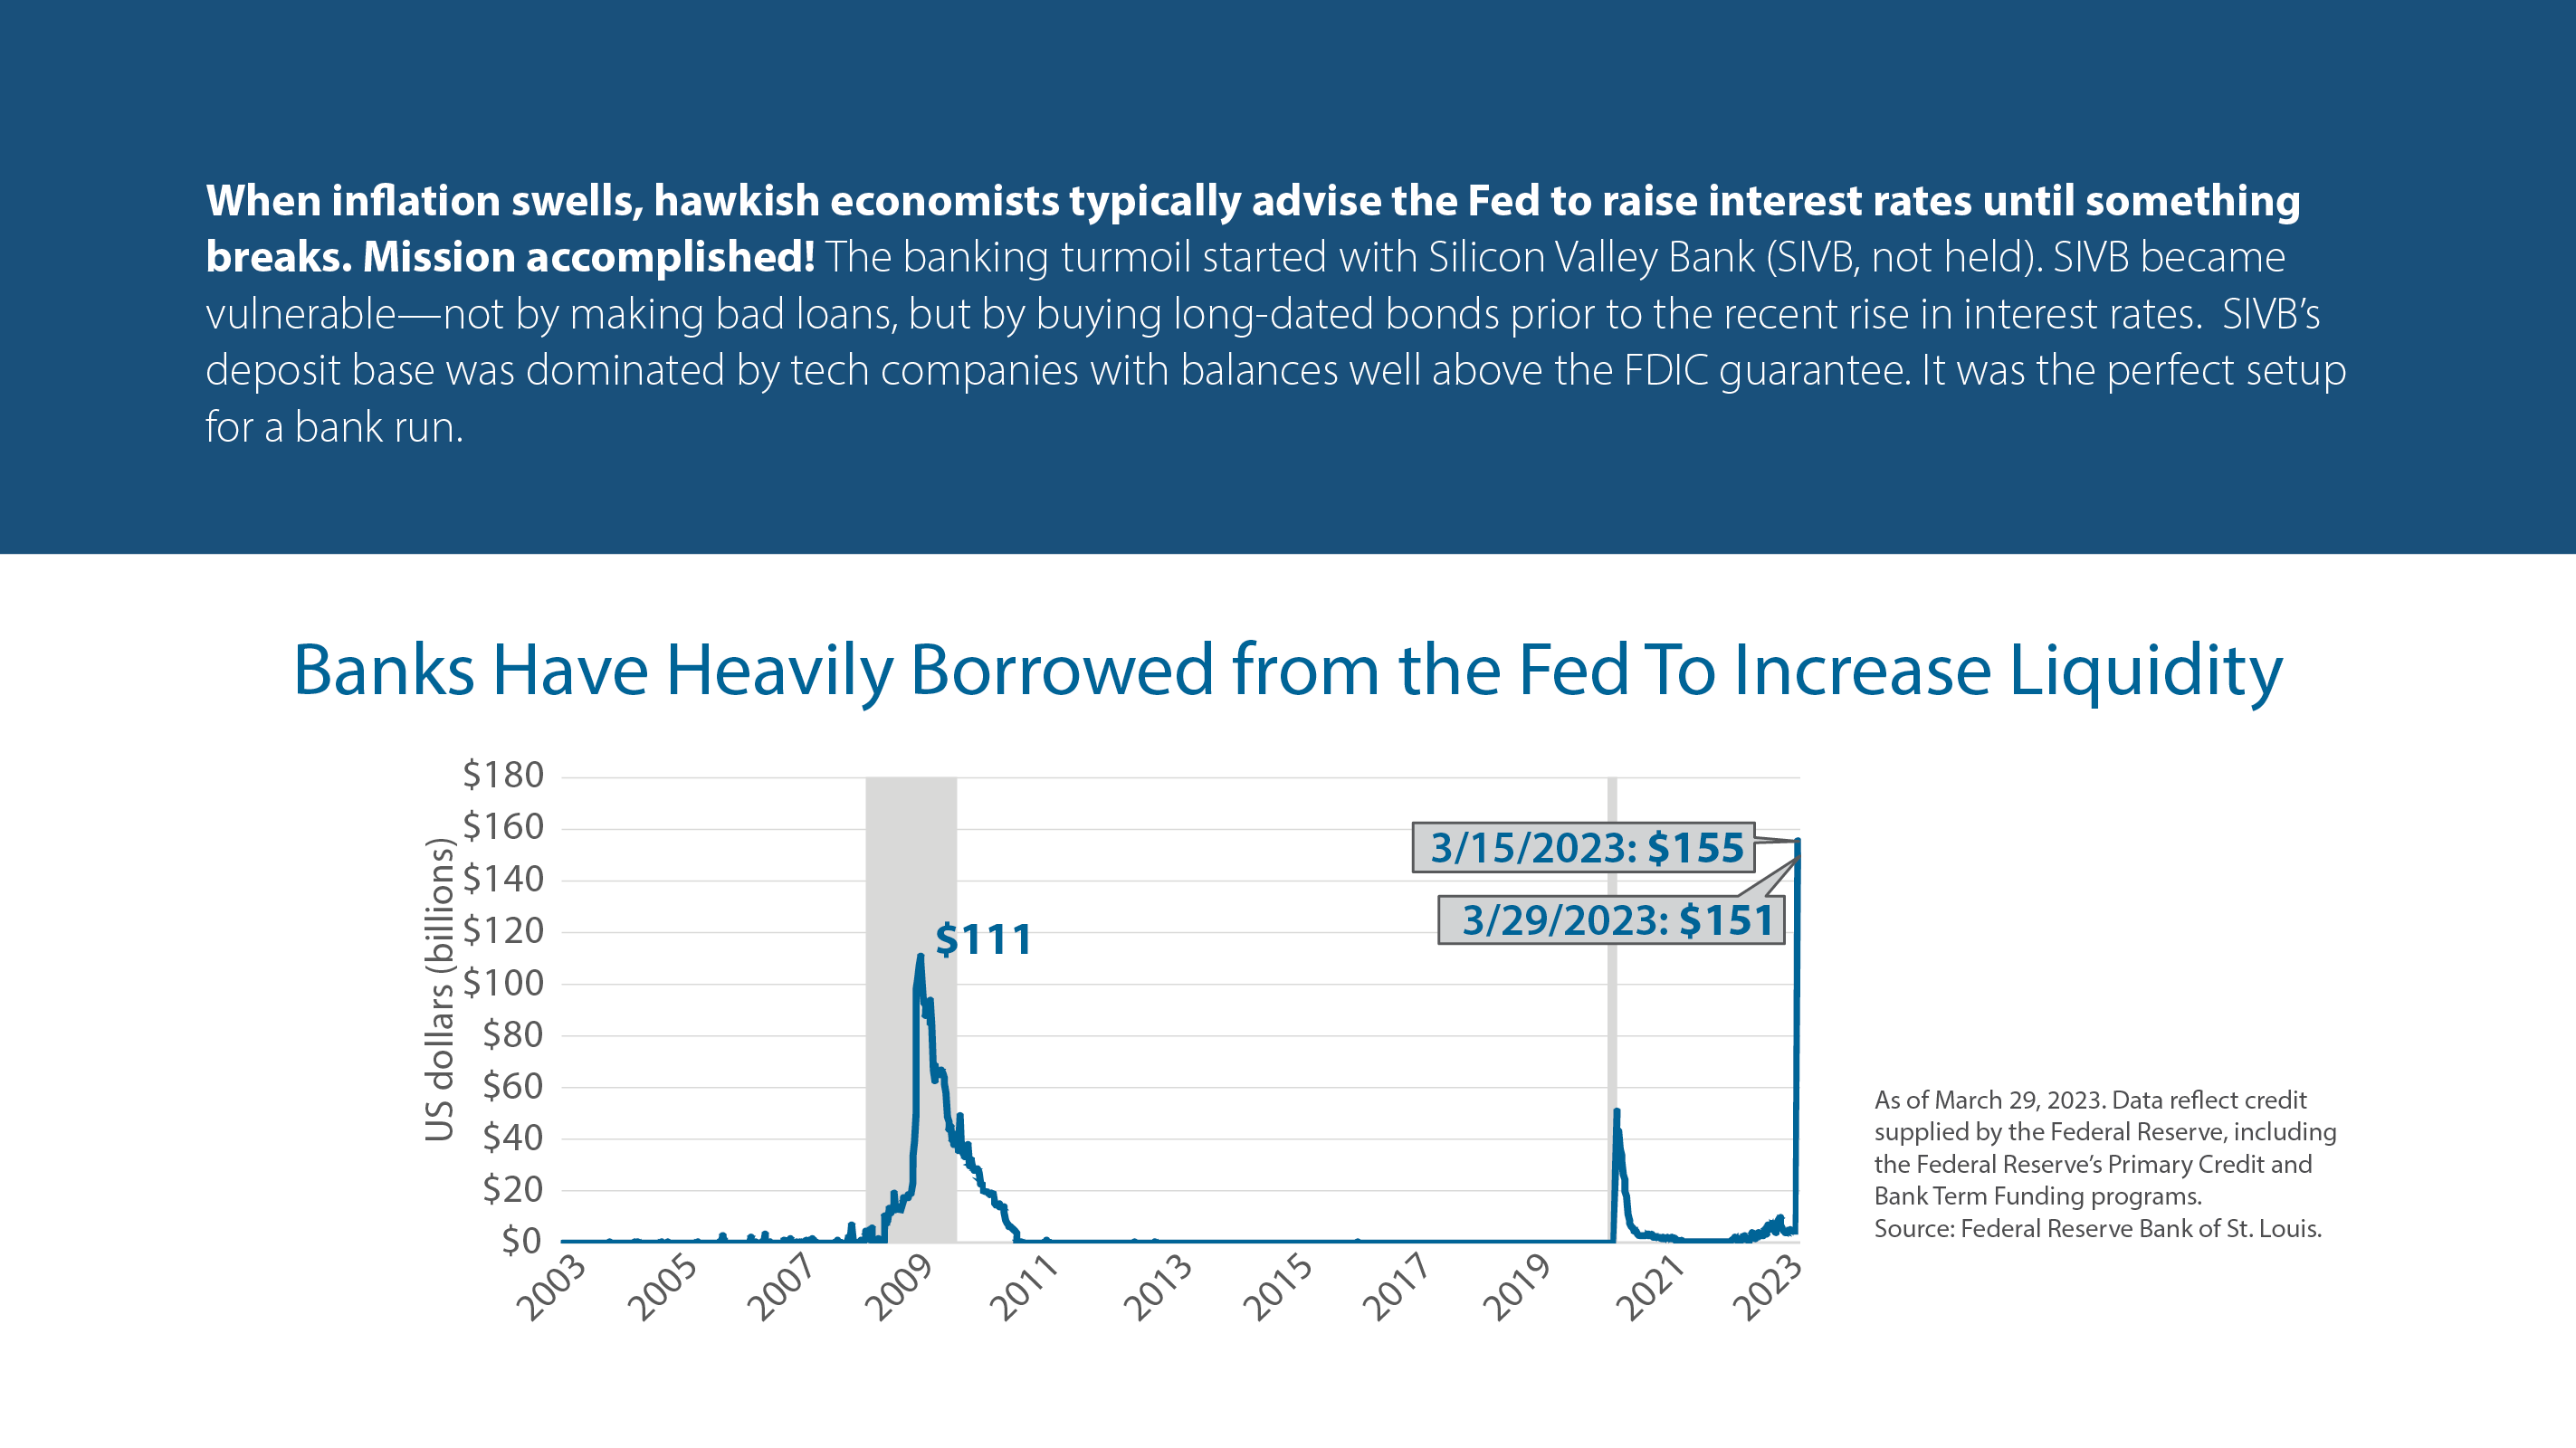 Banks Have Heavily Borrowed from the Fed To Increase Liquidity